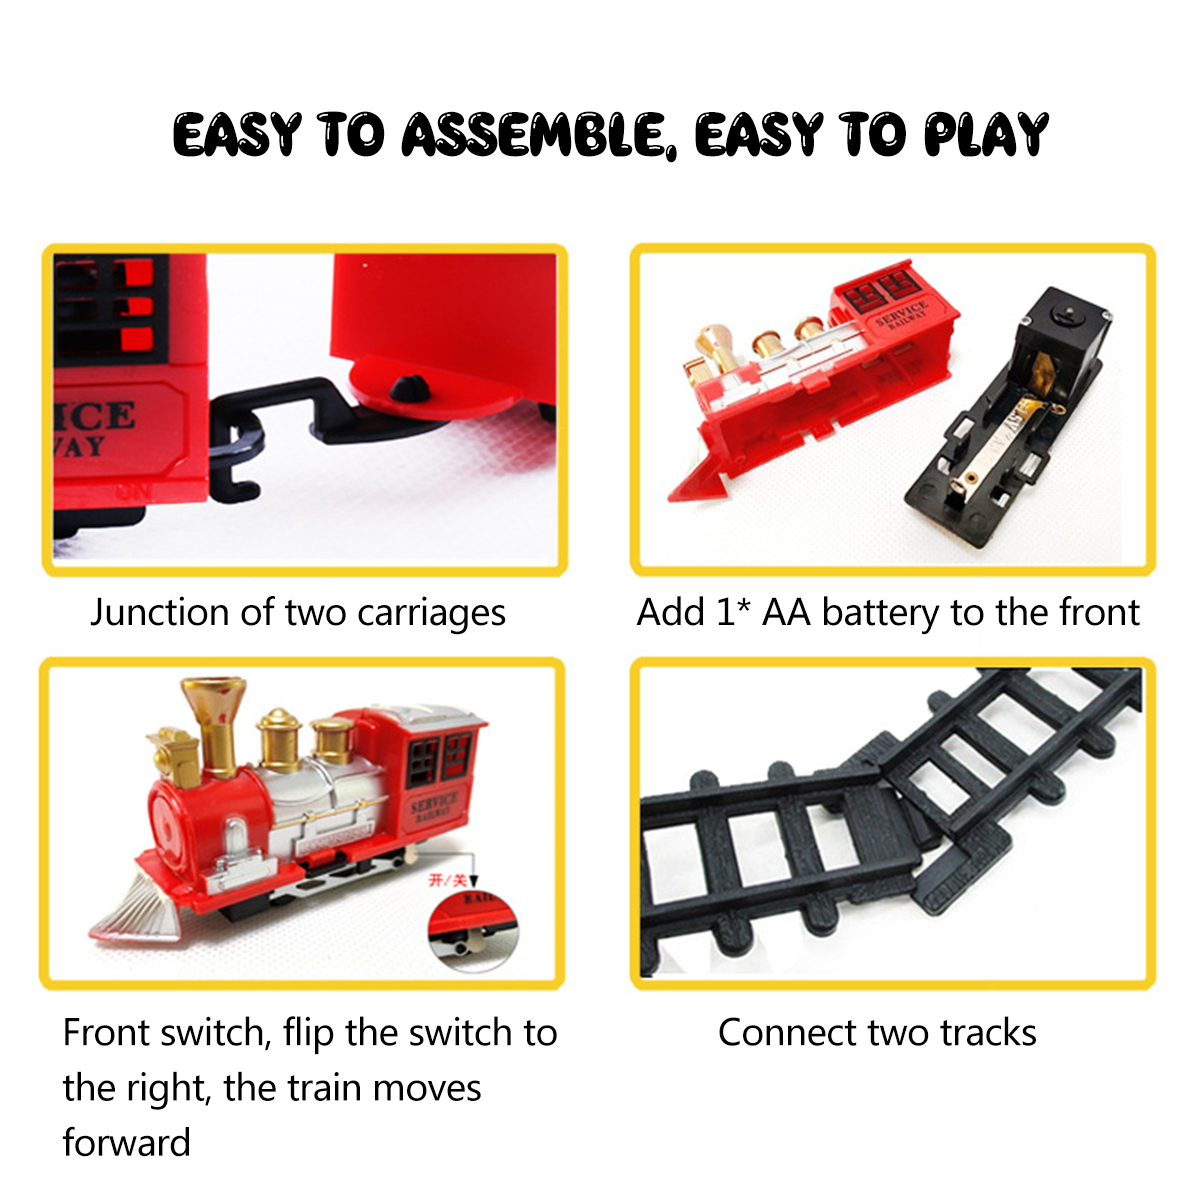 Mini-Electric-ABS-DIY-Assembly-Realistic-Front-Rail-Train-Track-Play-Fun-Model-Toy-for-Kids-Christma-1766568-6